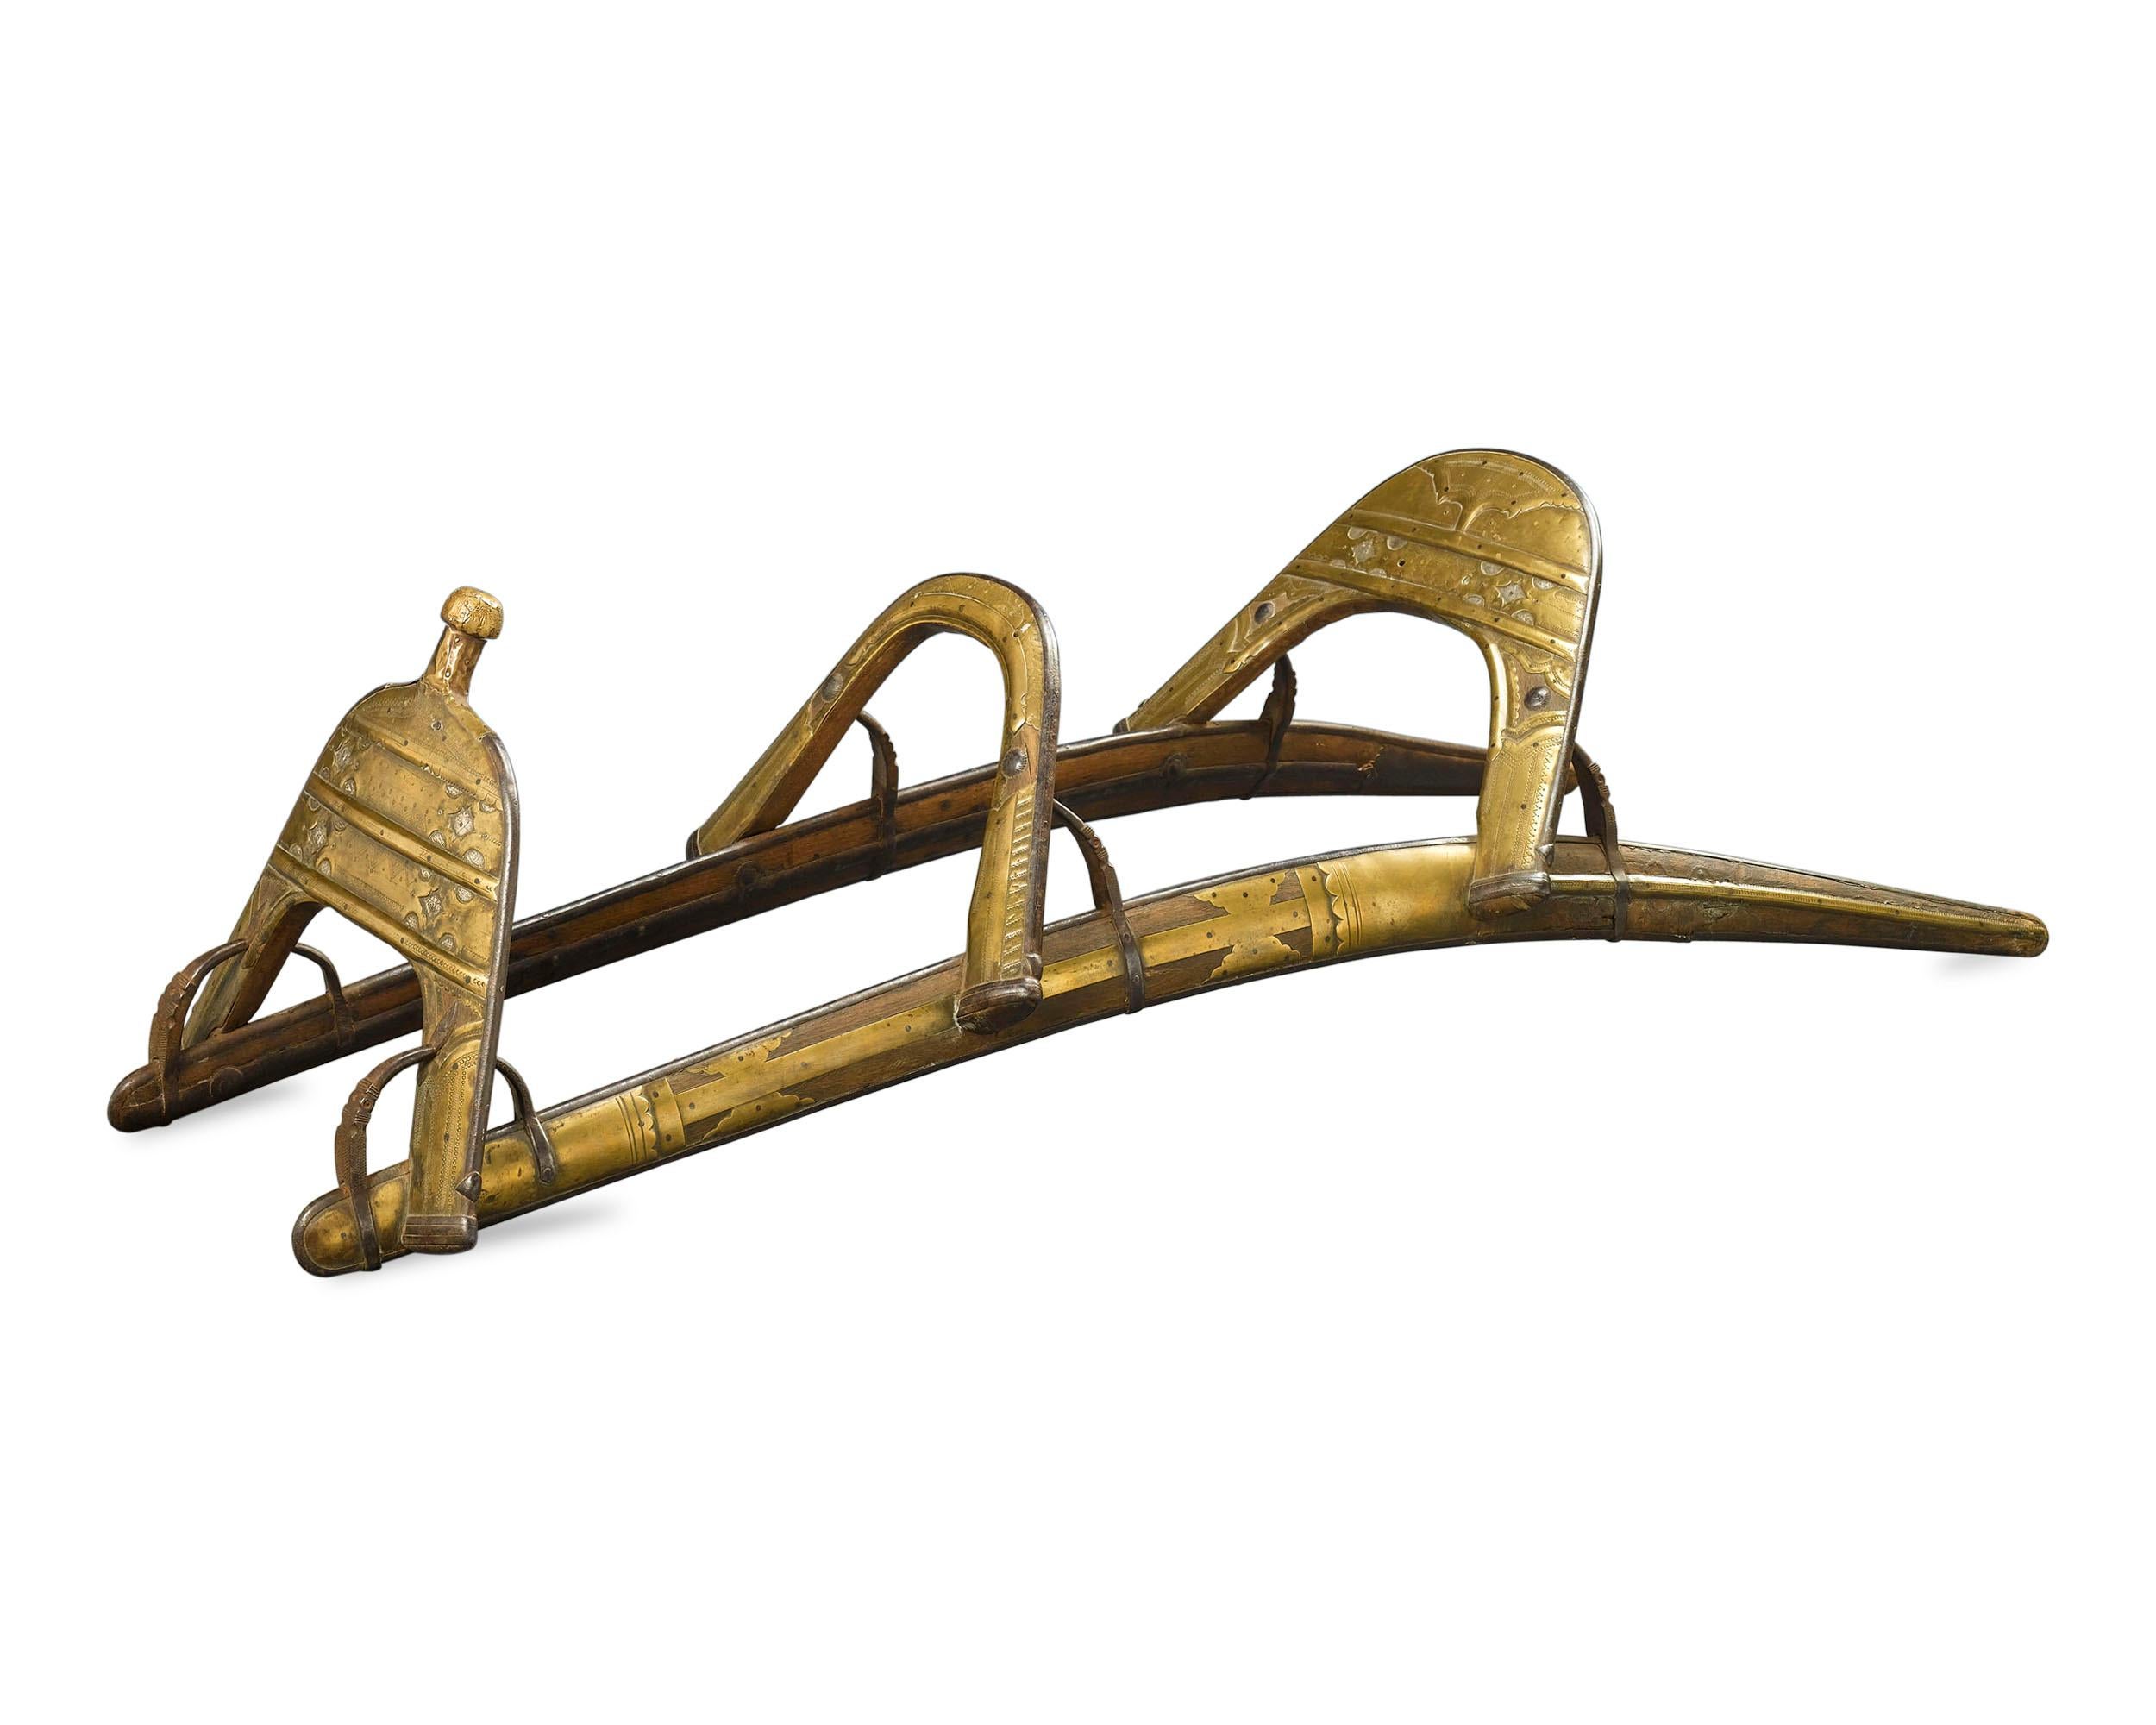 This fascinating piece of military history is a camel saddle created for and used by the Dromedary Regiment (Regiment des Dromedaires) during Napoleon’s Egyptian campaigns between 1798-1801. The term “dromedary” refers to the dromedary camel, better